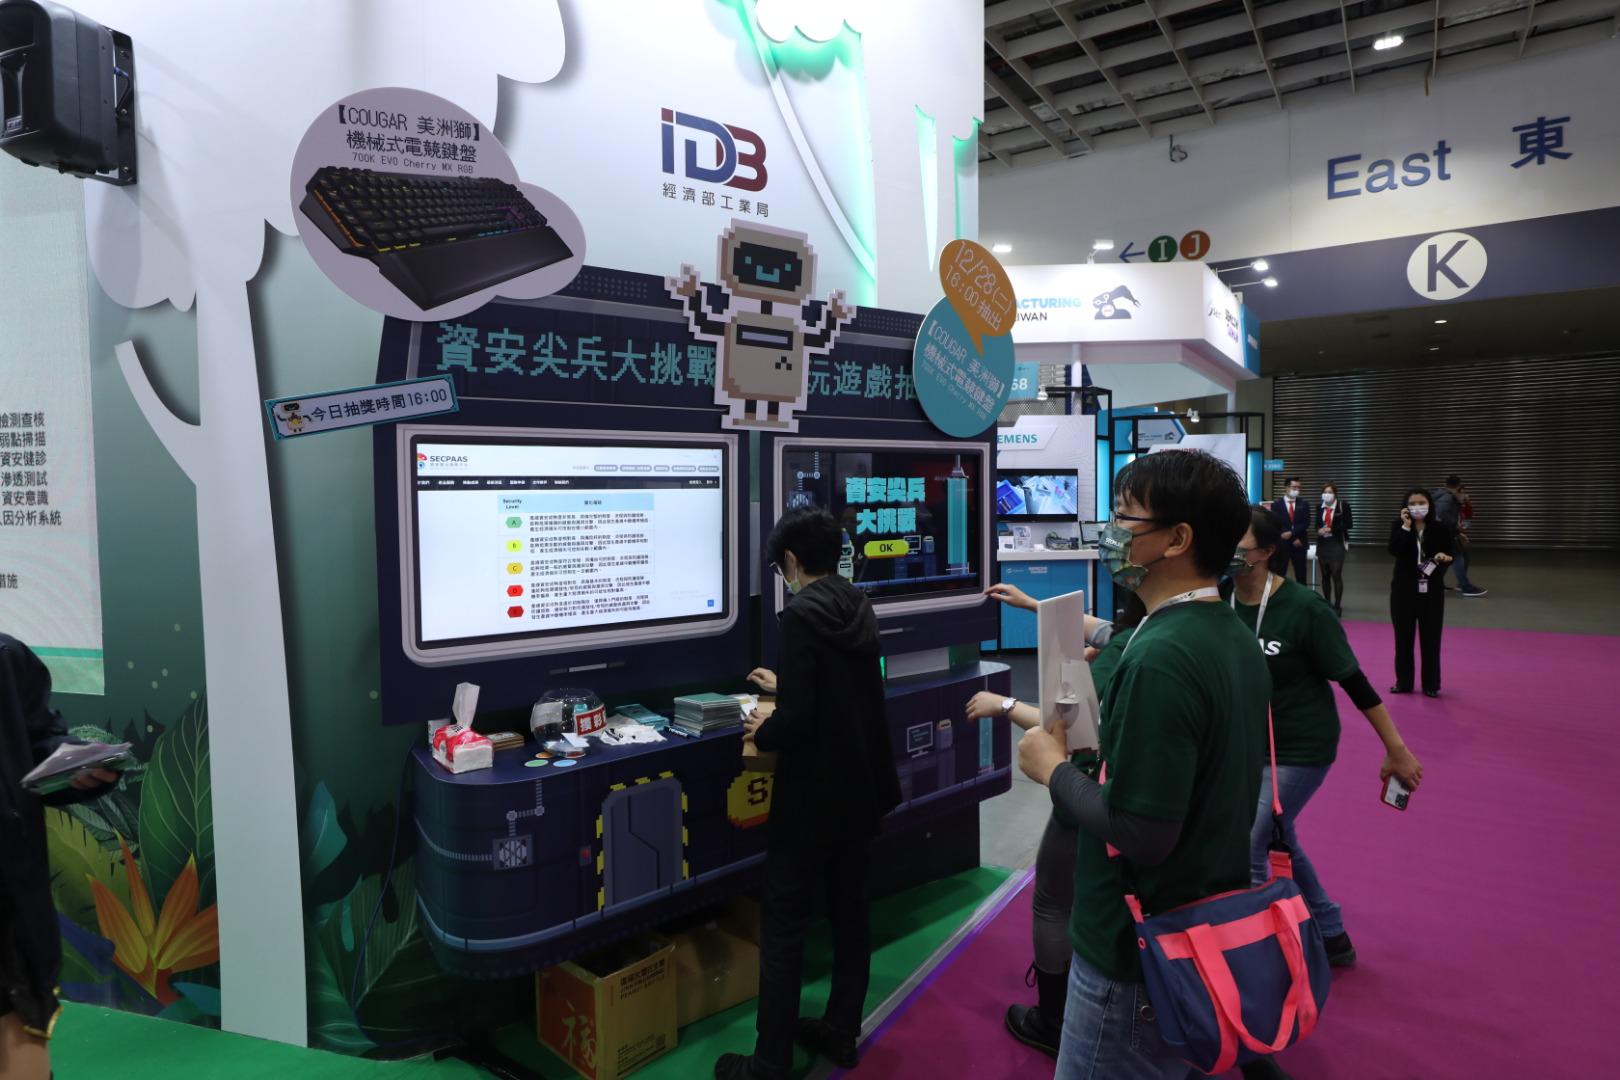 Wang Yi Design, ITRI, Taiwan International Semiconductor Exhibition, ITRI, SEMICON Taiwan 2021, SECPAAS, Information Security Integrated Service Platform, Exhibition Design, Exhibition Booth Design, Booth Design, Booth Decoration